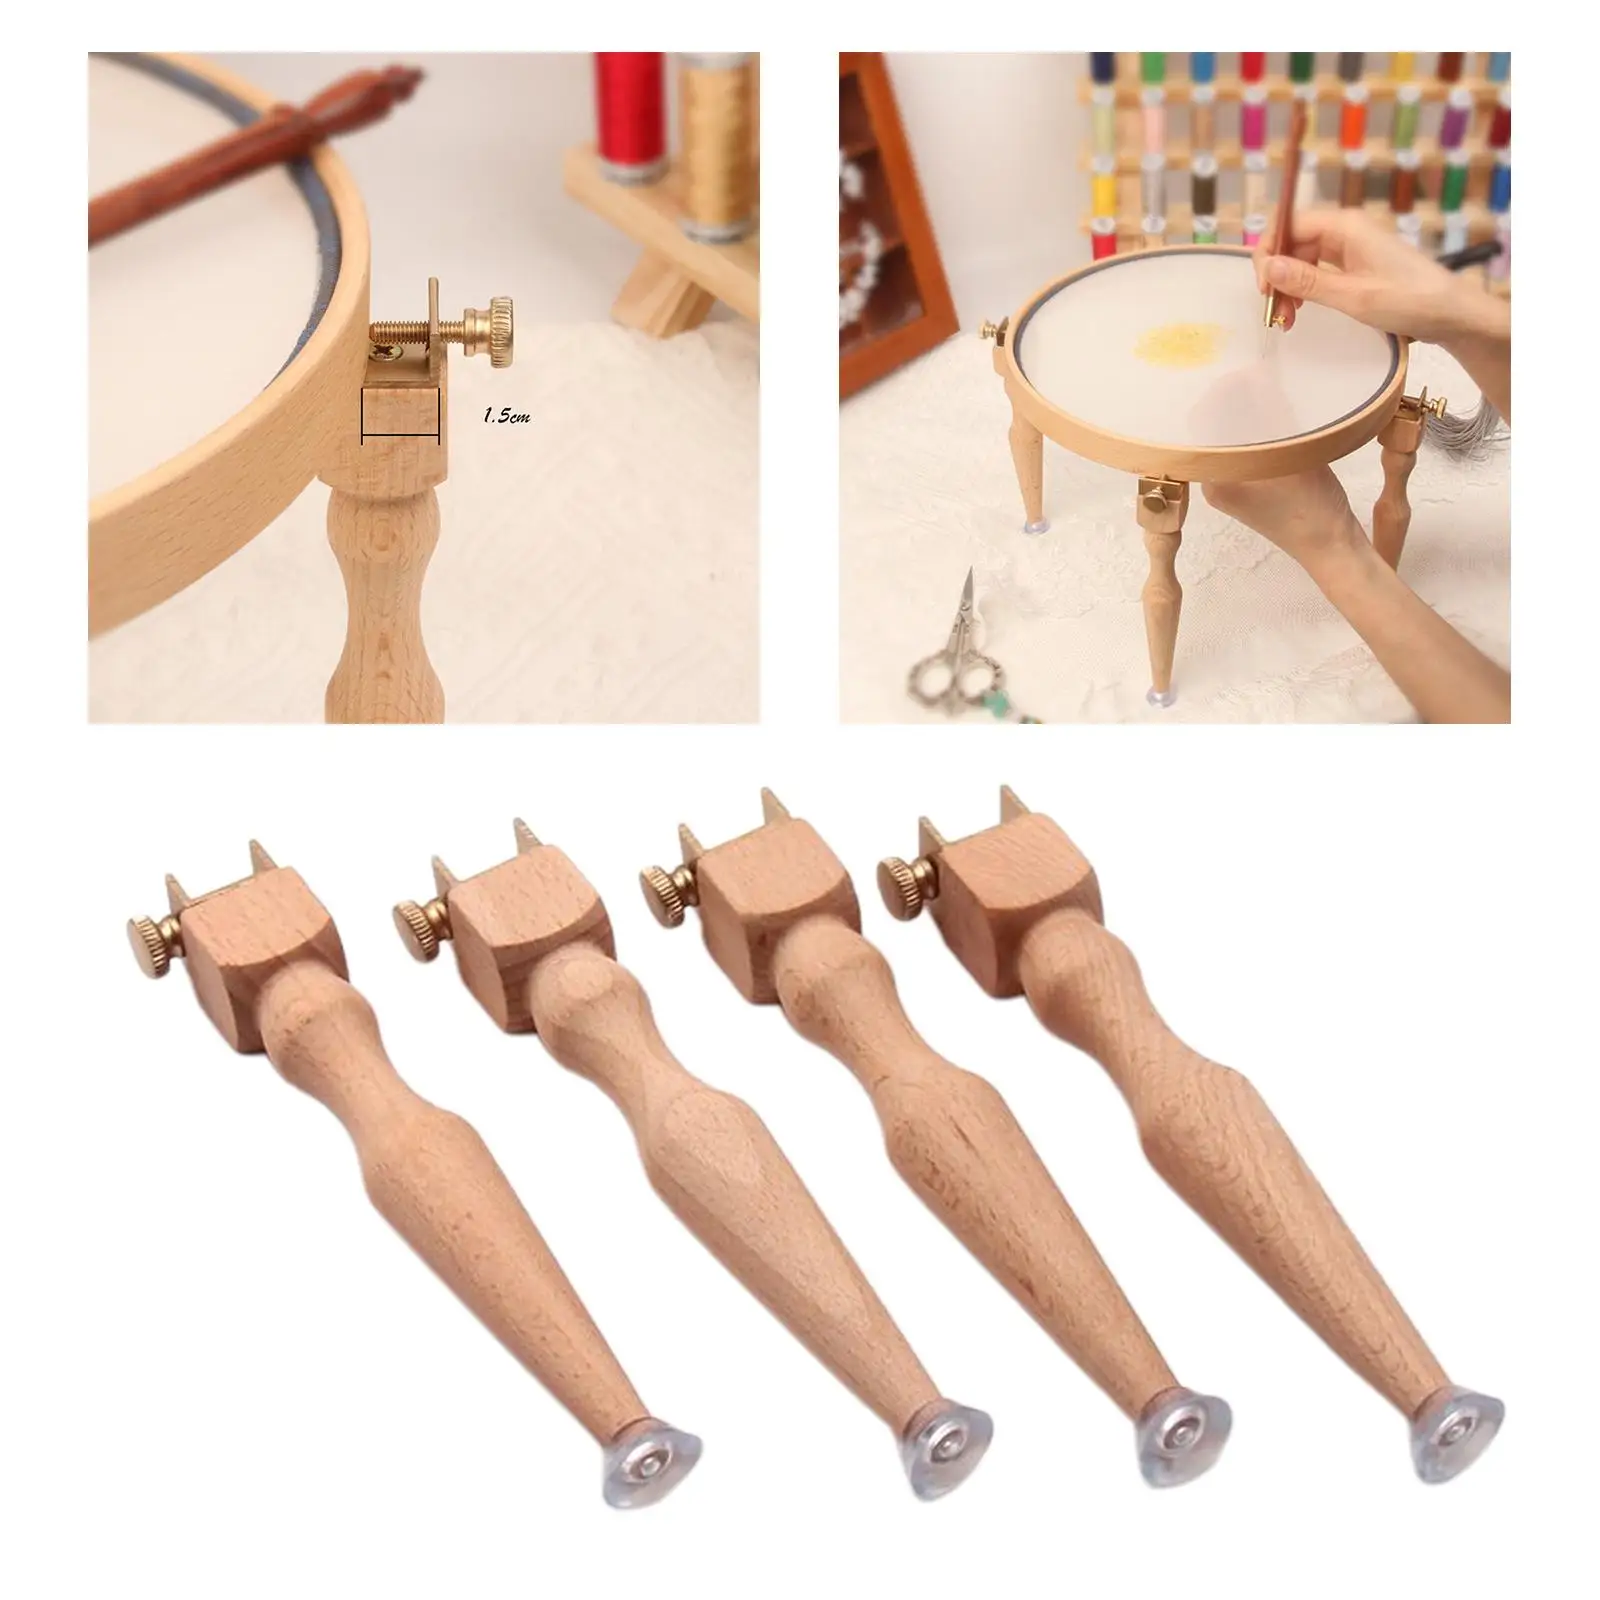 Adjustable Wooden Embroidery Hoop Stand Legs Set - 4Pcs - Embroidery Hoop Legs Supplies for Sewing